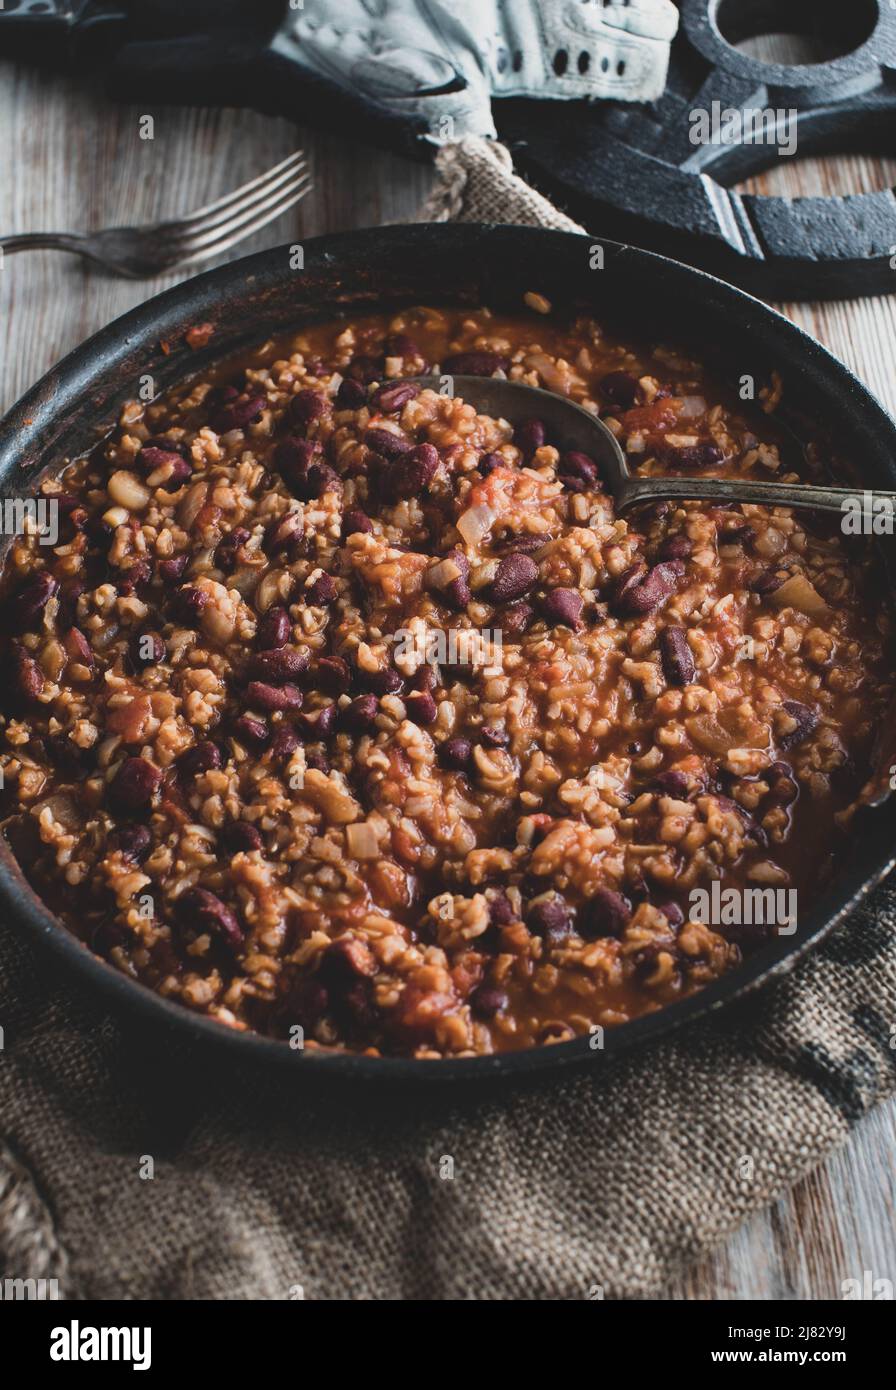 Healthy fitness food with a vegan muscle building dish cooked with brown rice, kidney beans, vegetables and tomato sauce. Stock Photo